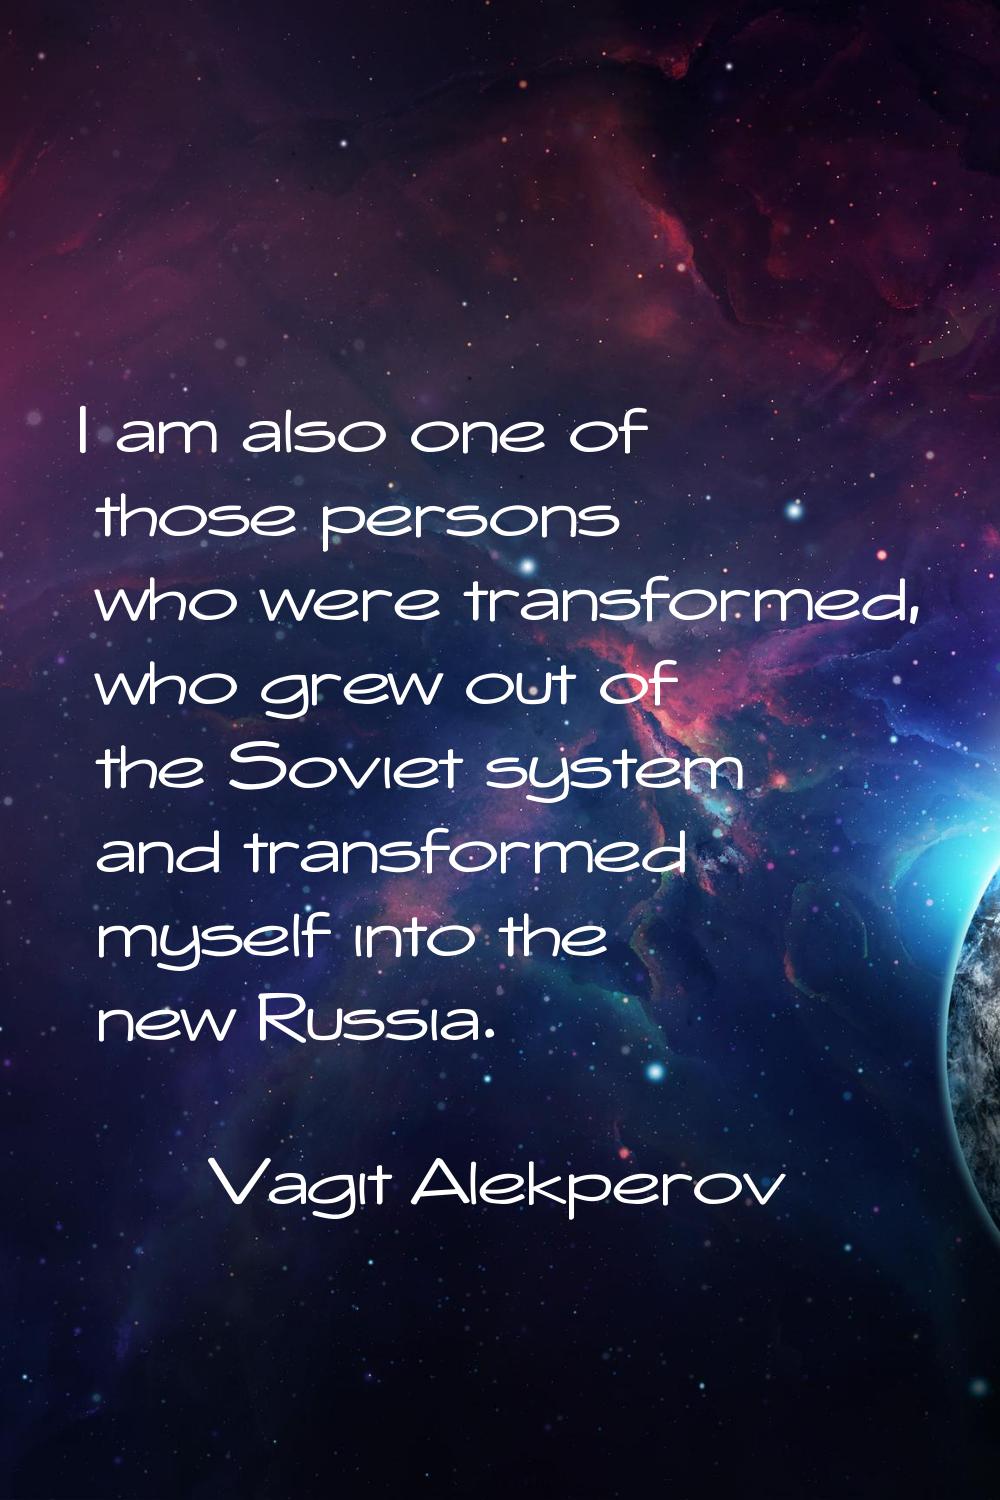 I am also one of those persons who were transformed, who grew out of the Soviet system and transfor